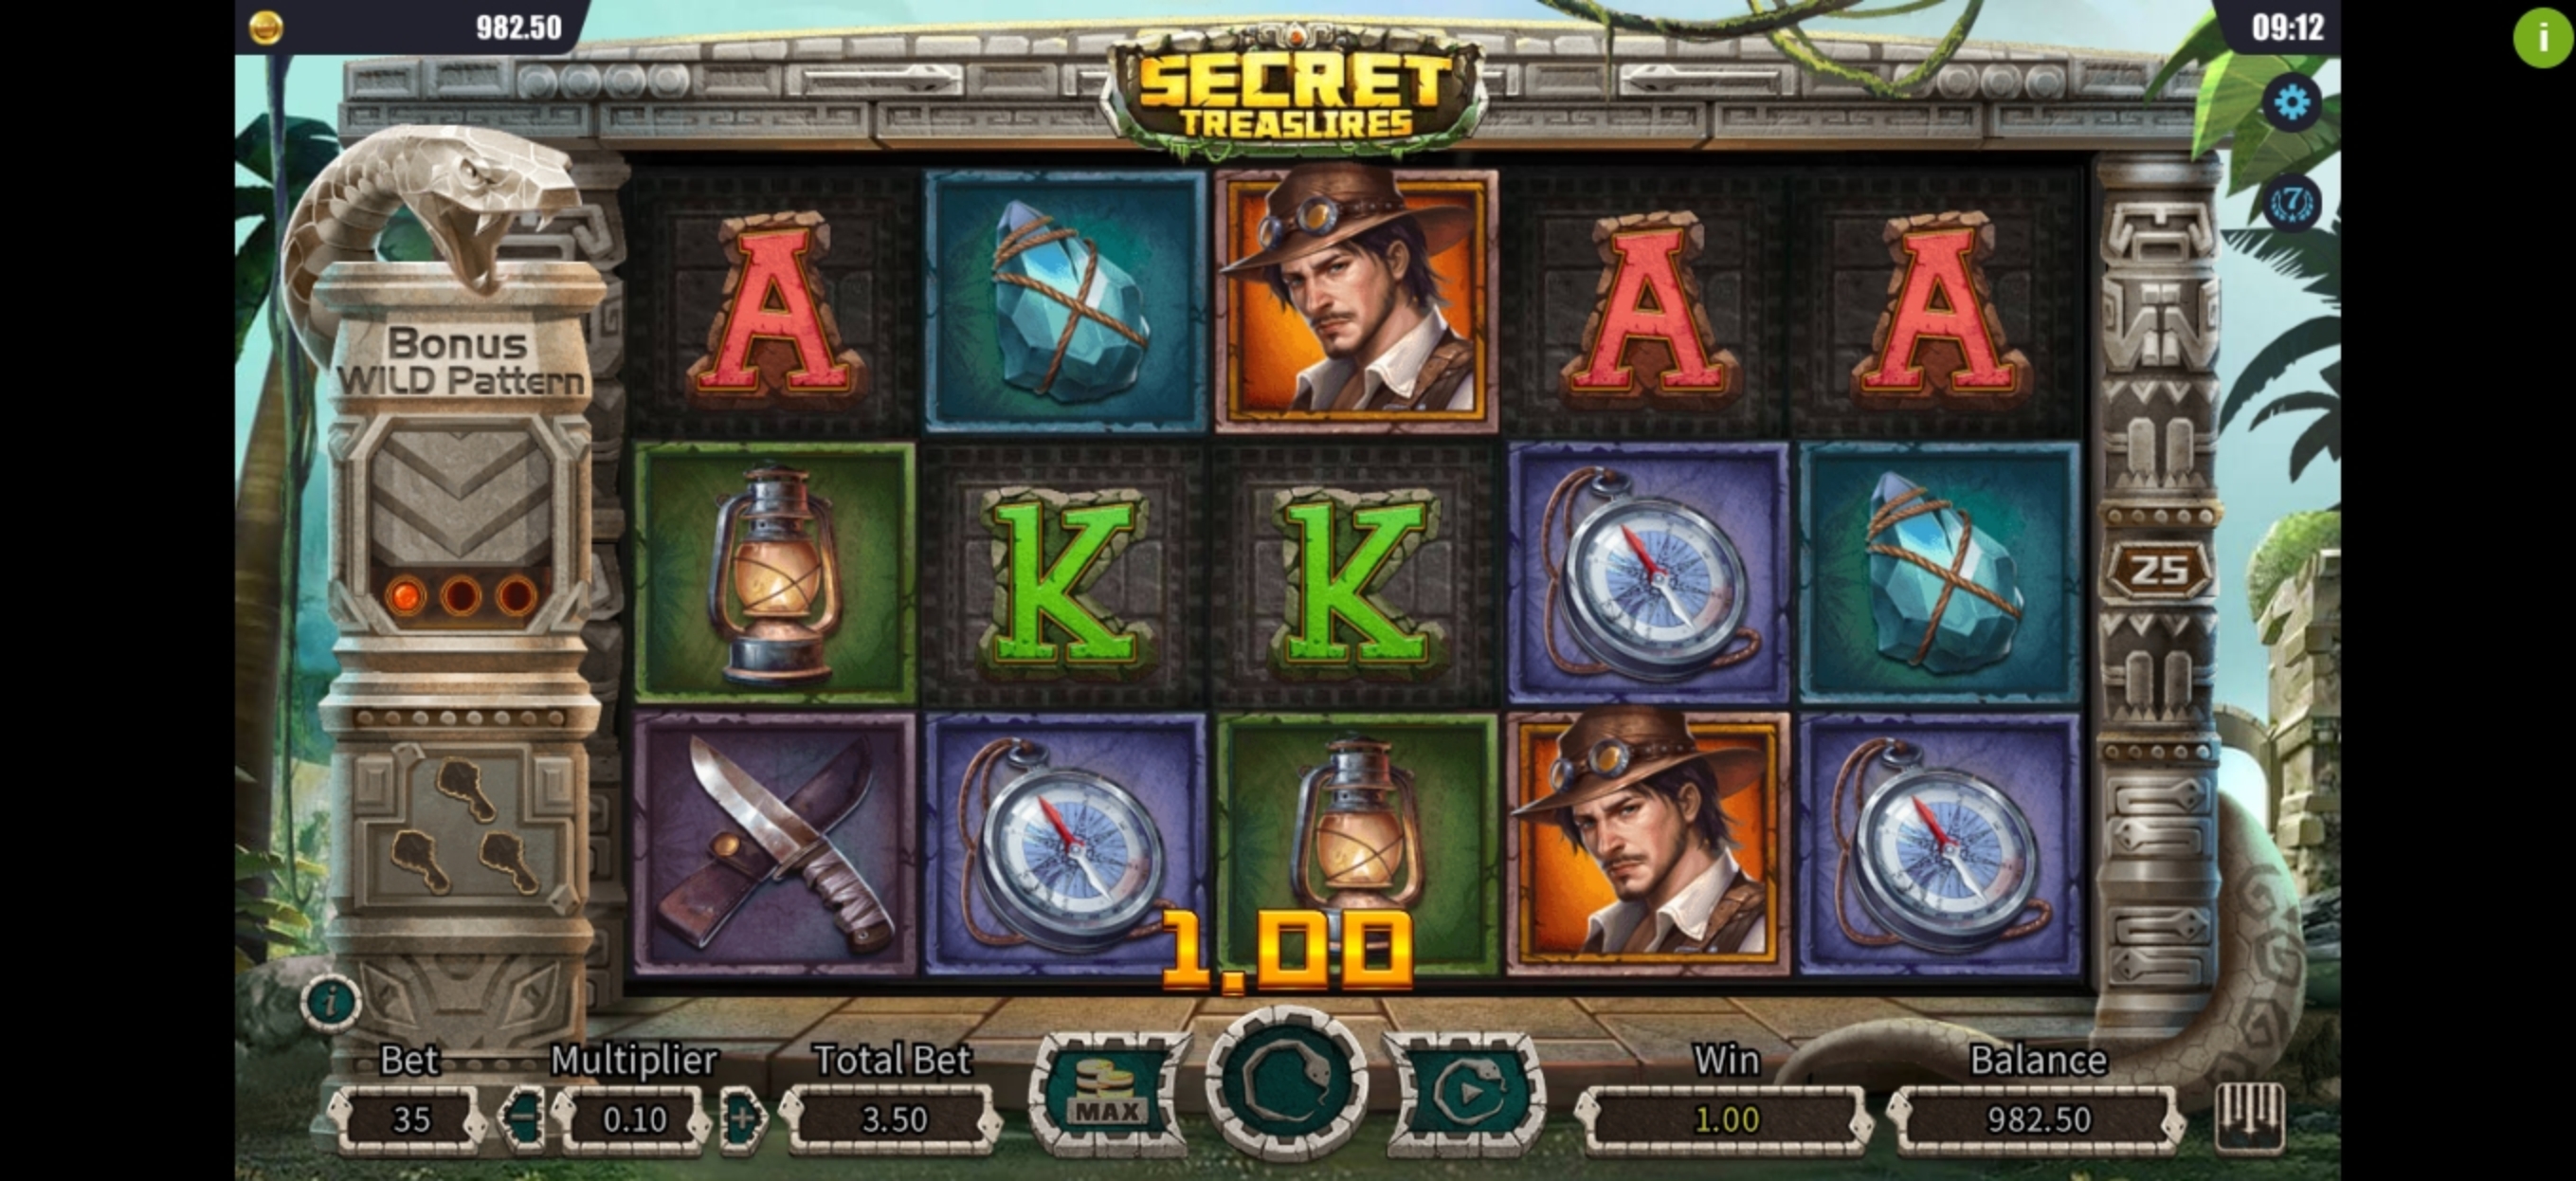 Win Money in Secret Treasures Free Slot Game by Dreamtech Gaming